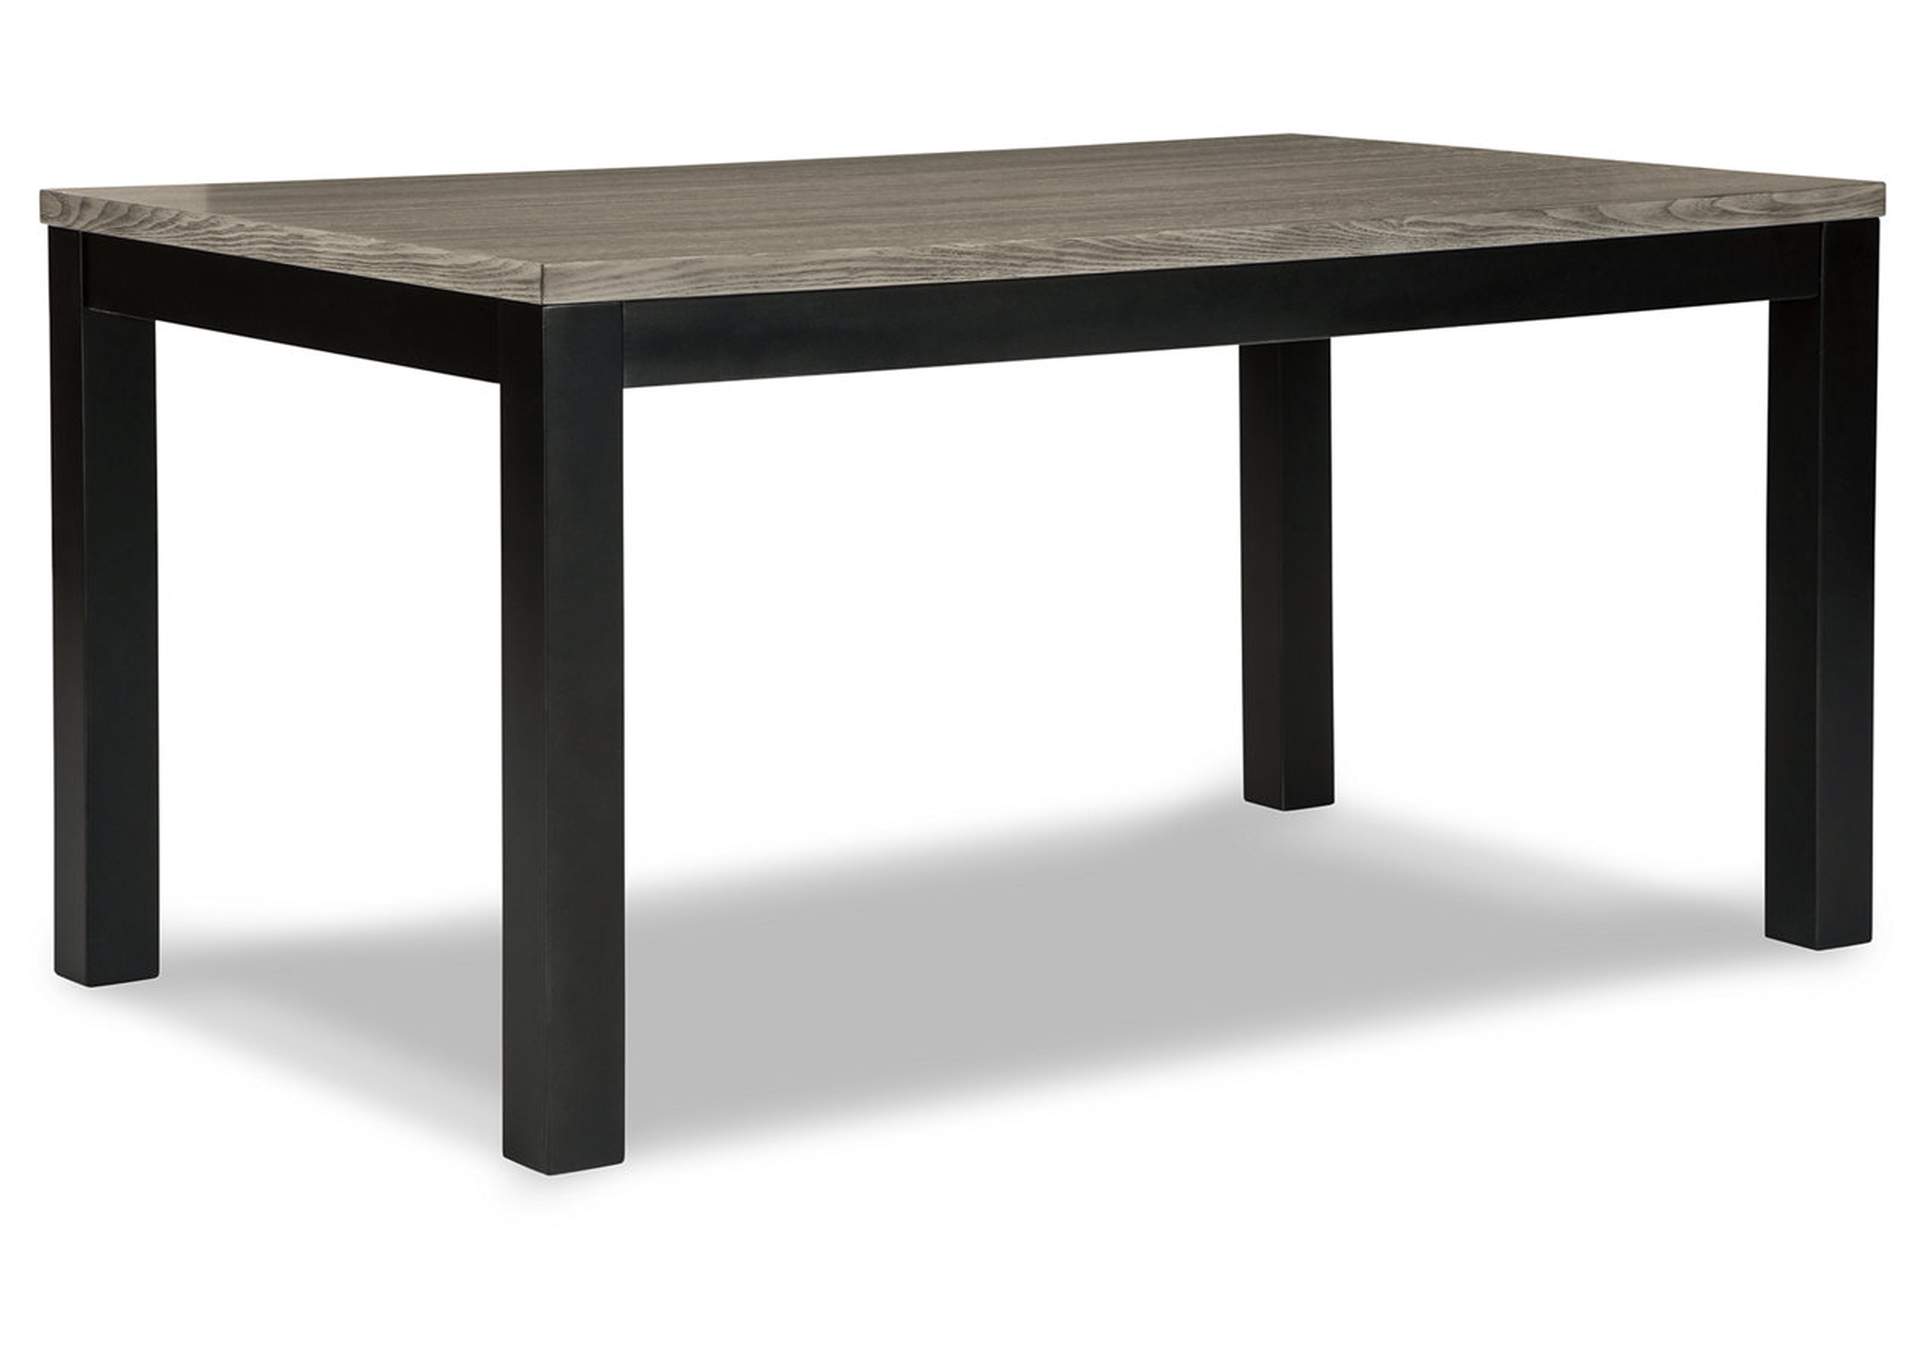 Dontally Dining Table,Benchcraft